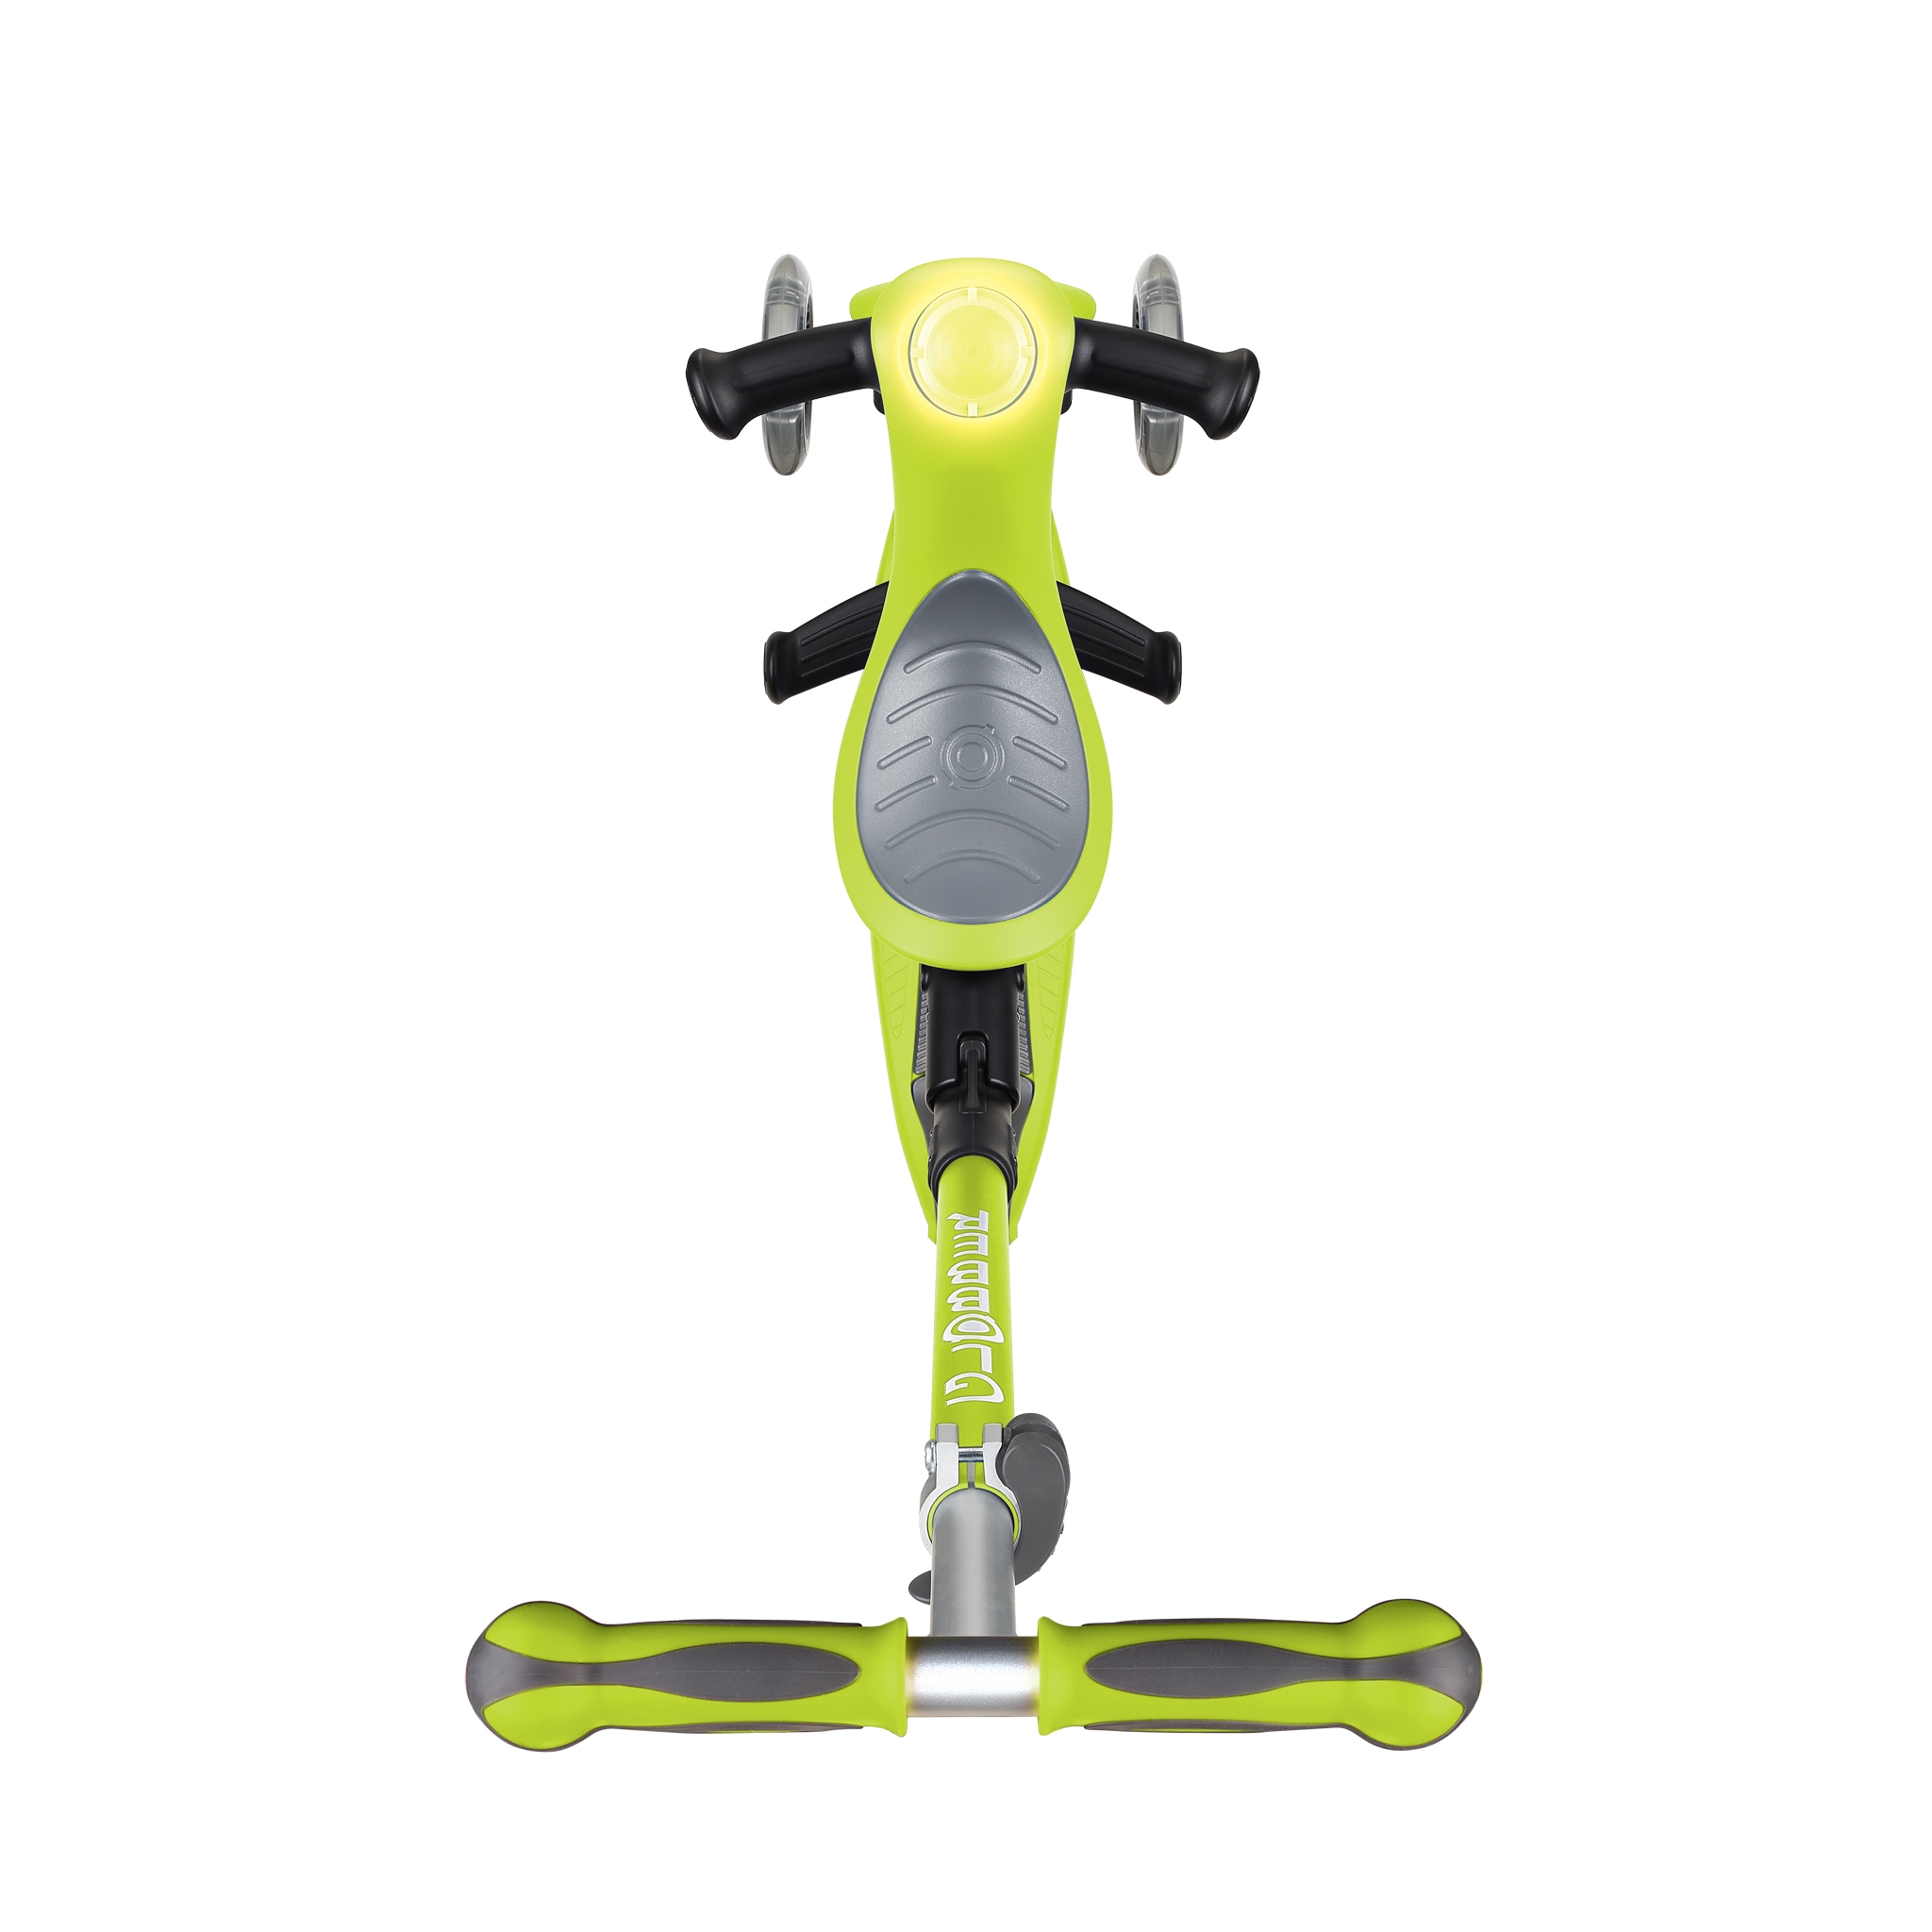 GO-UP-DELUXE-PLAY-ride-on-walking-bike-scooter-with-light-and-sound-module-and-extra-wide-3-height-adjustable-seat-lime-green 2